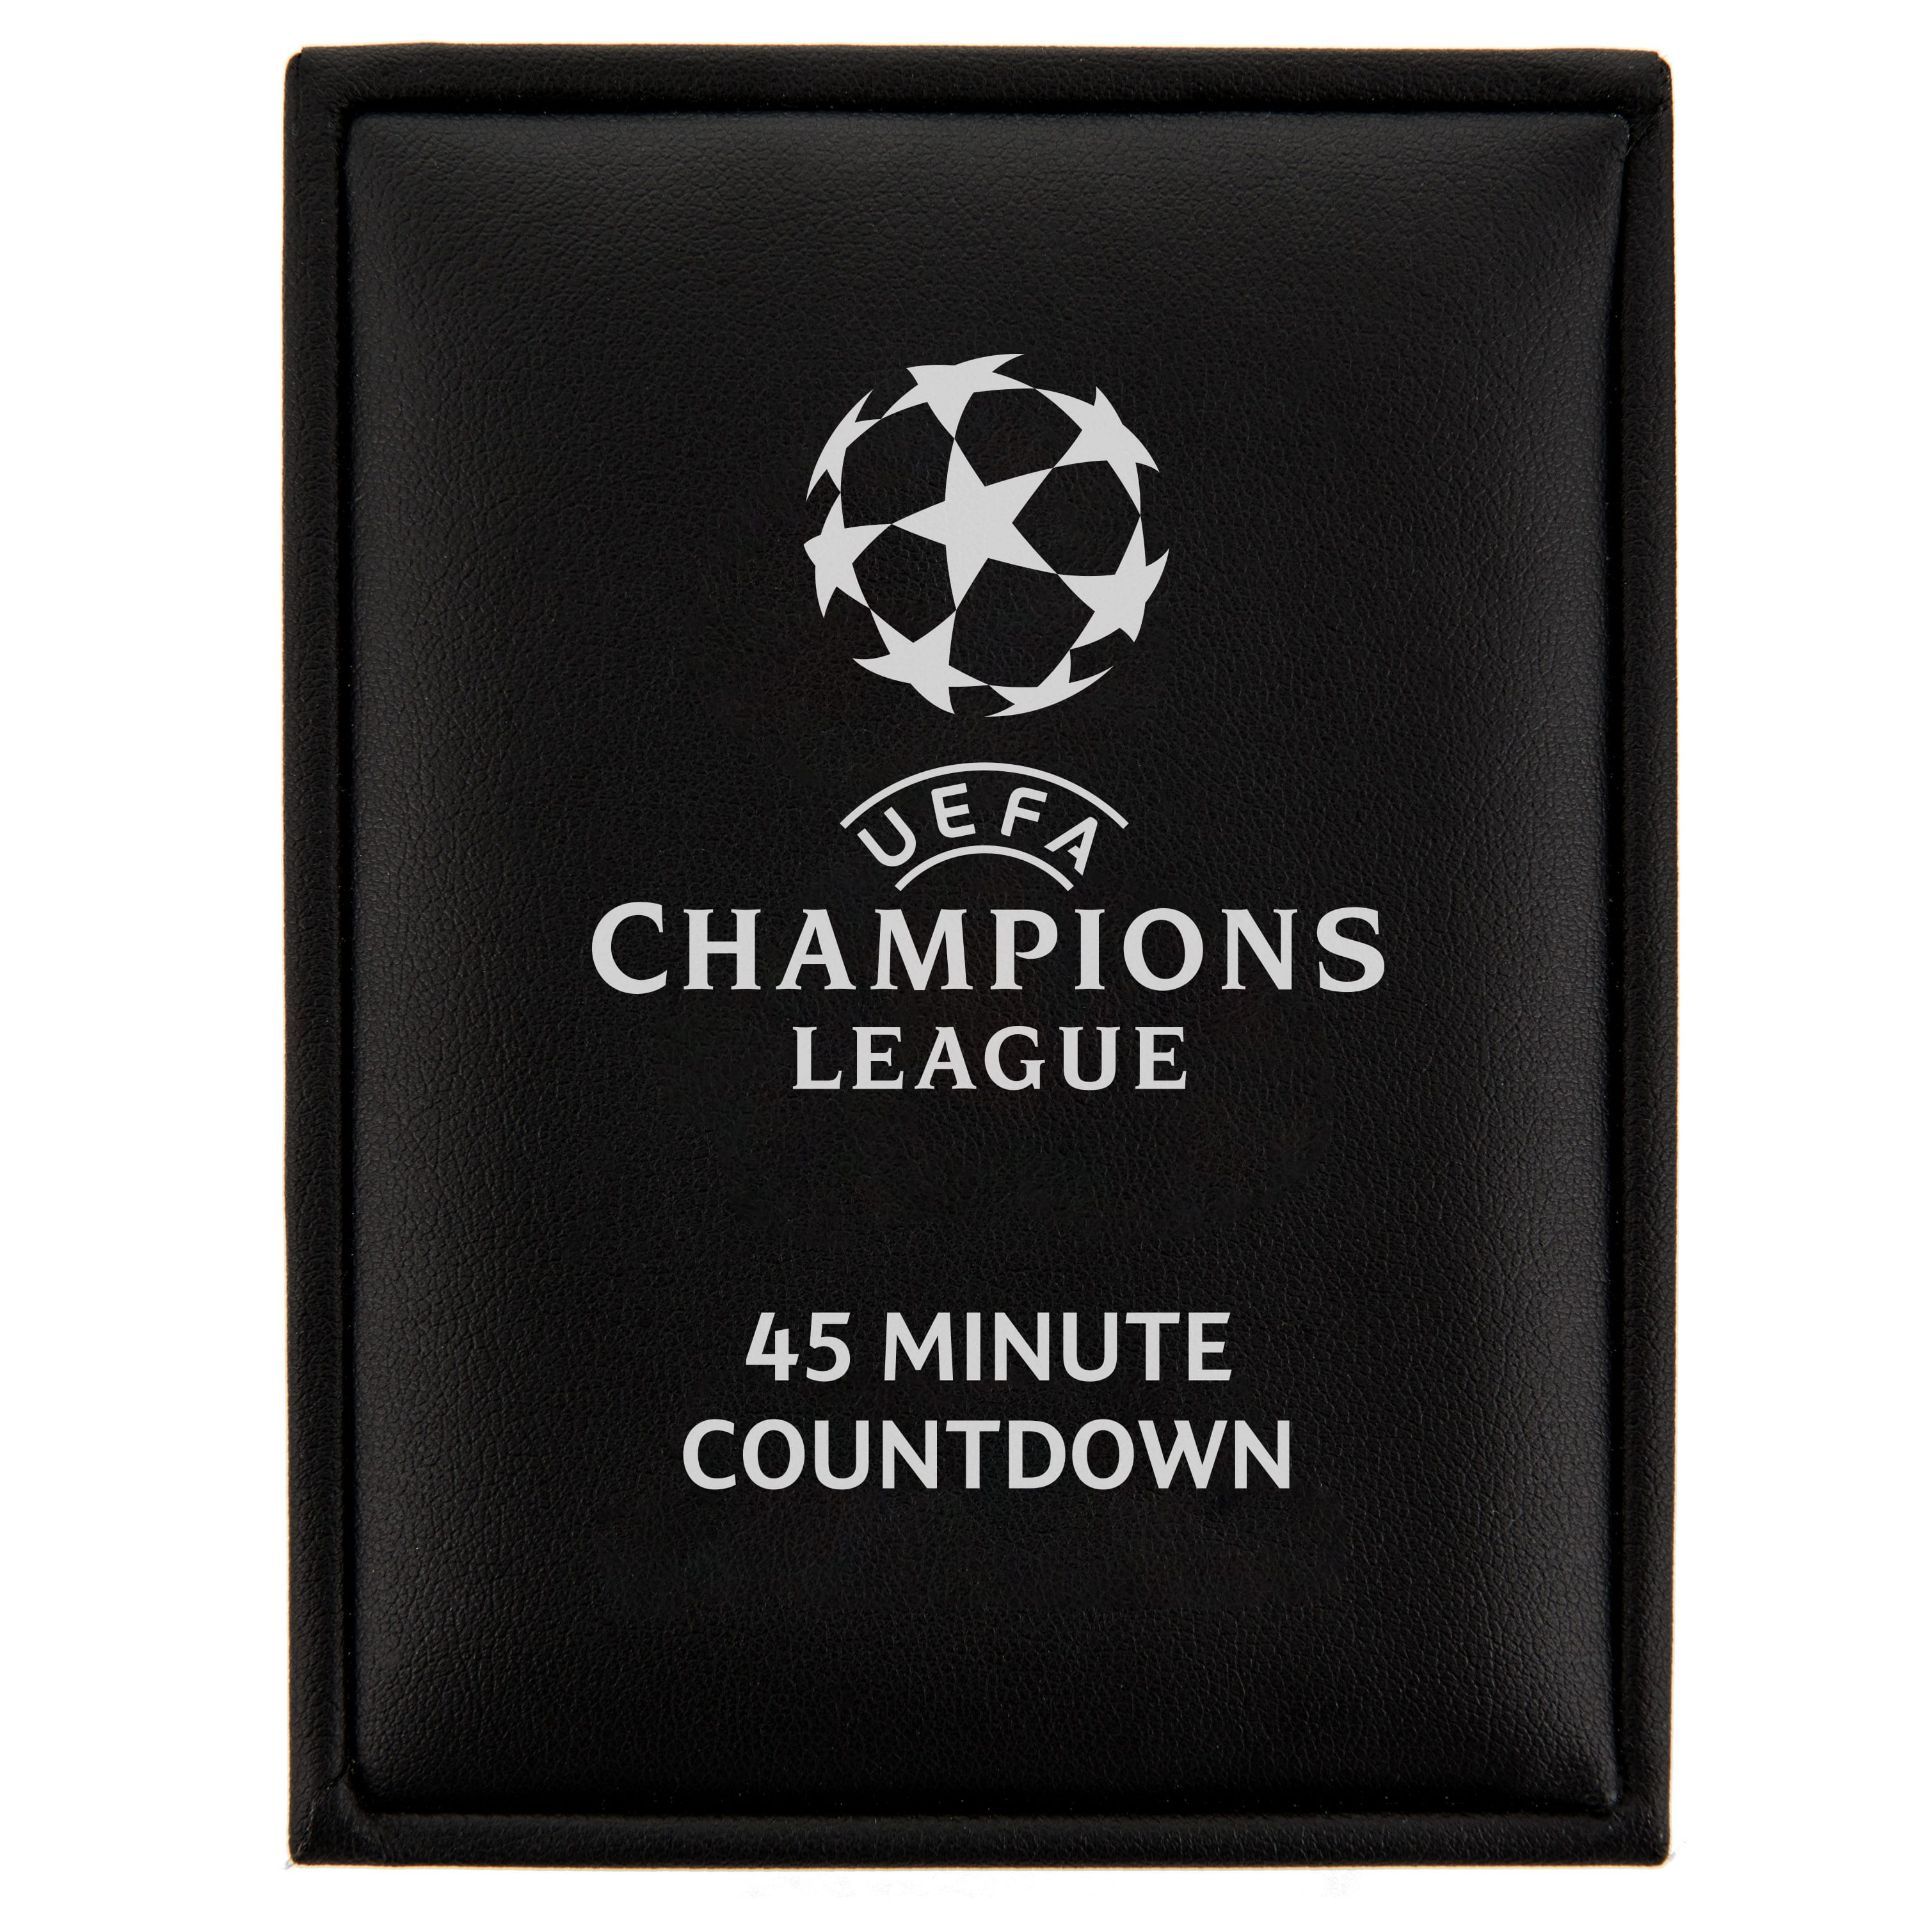 BRAND NEW OFFICIAL UEFA CHAMPIONS LEAGUE 45 MINUTES COUNTDOWN WATCH CL45-STB-BLGRP, RRP £225 - Image 5 of 5